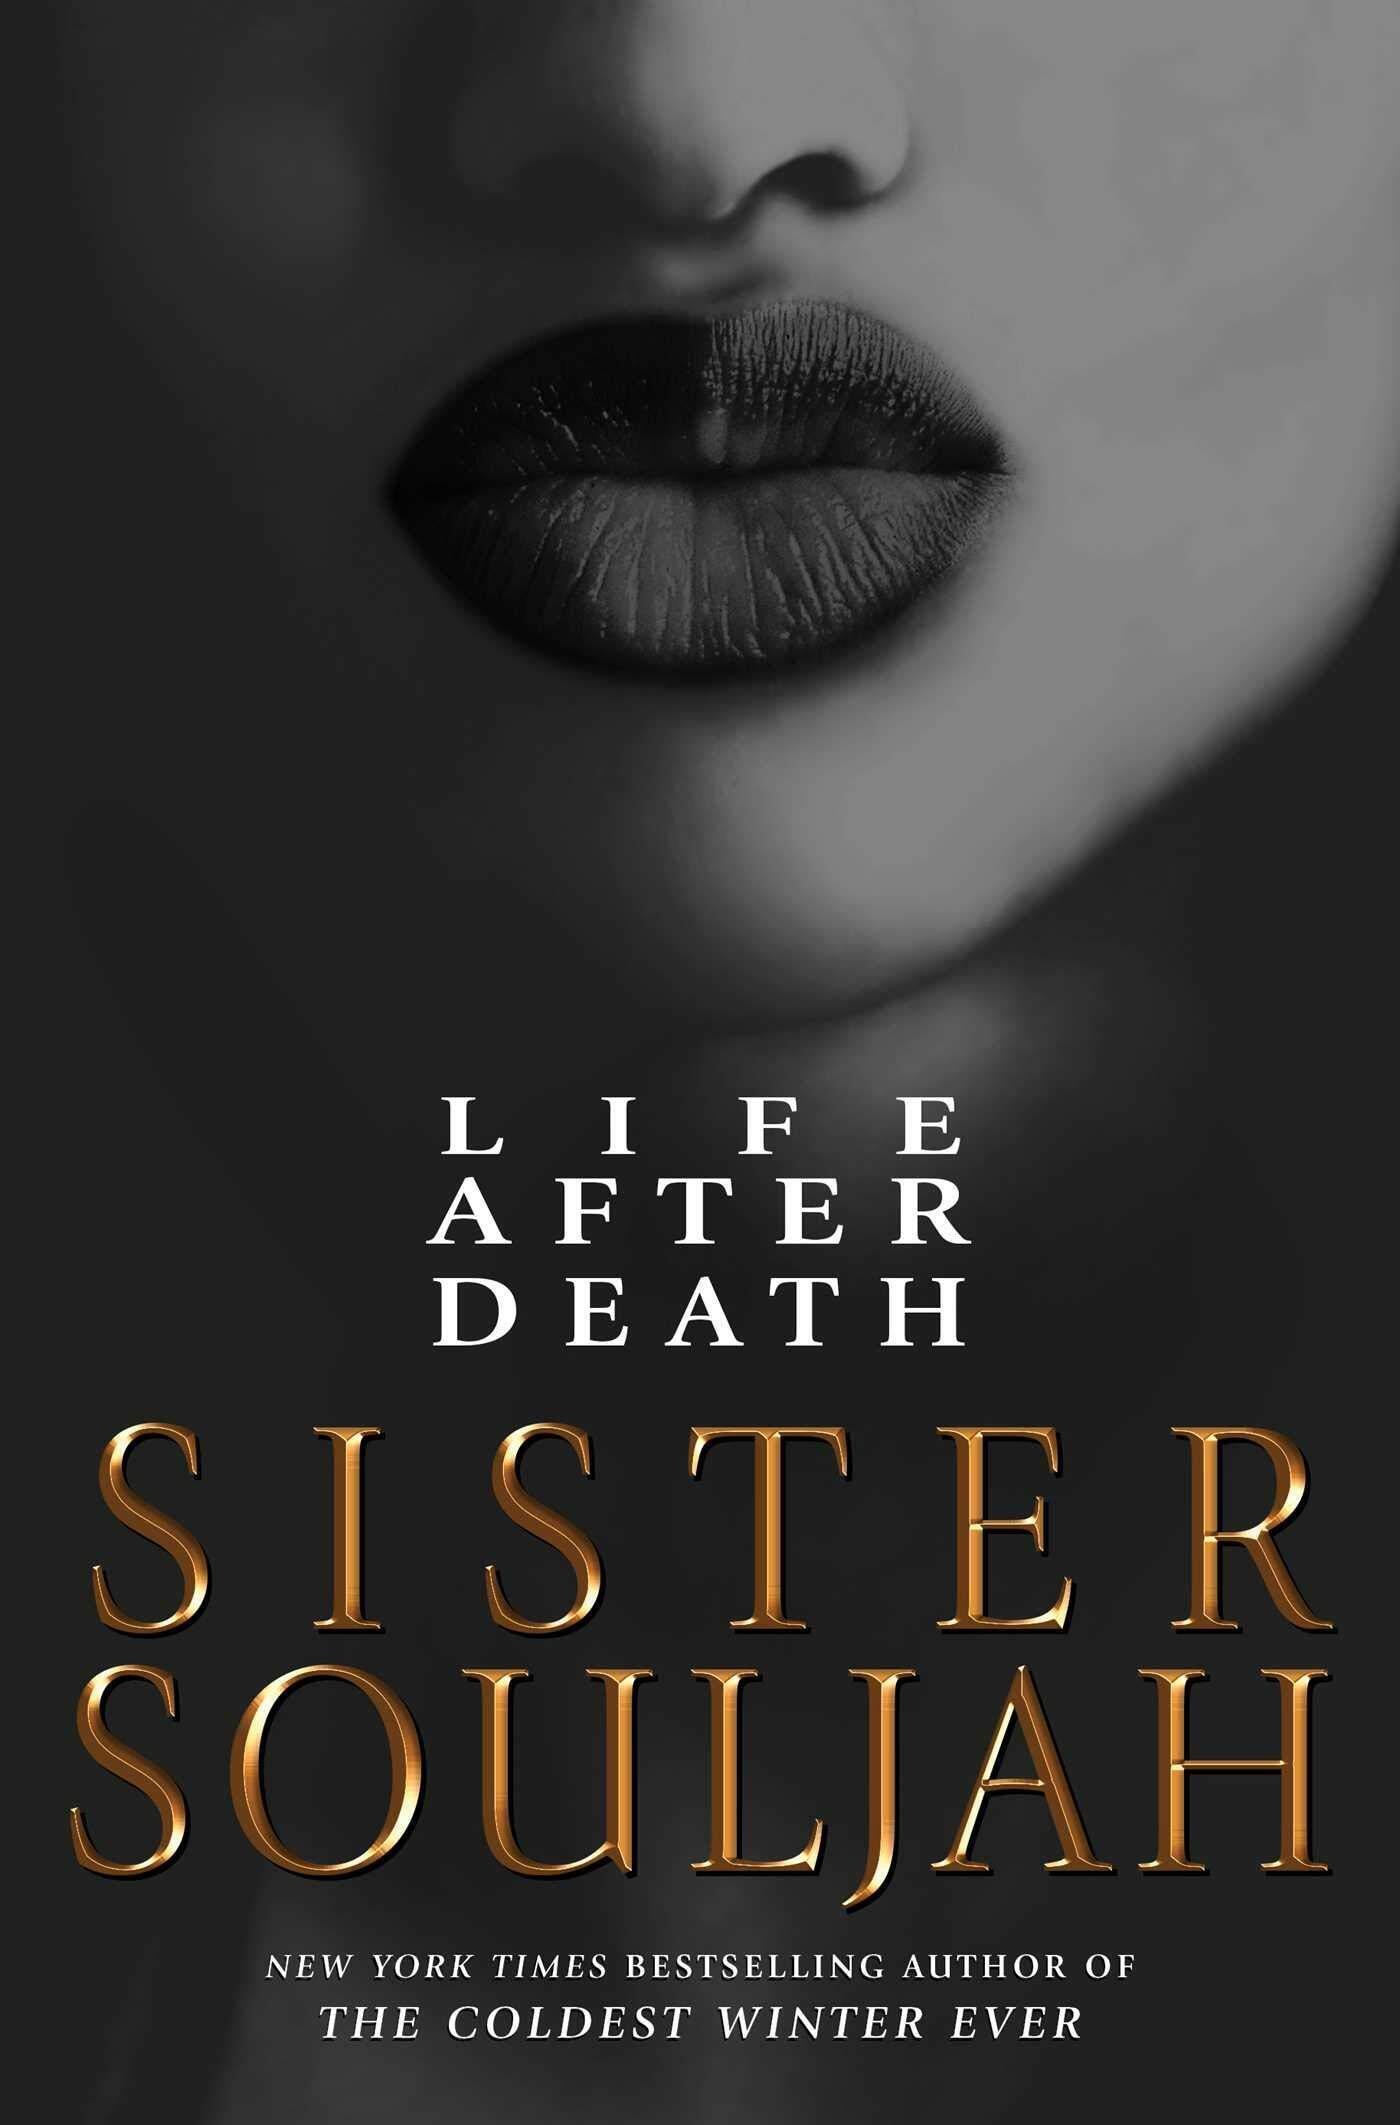 The book cover for Life After Death, showing a black and white photo of a woman making a kissing motion